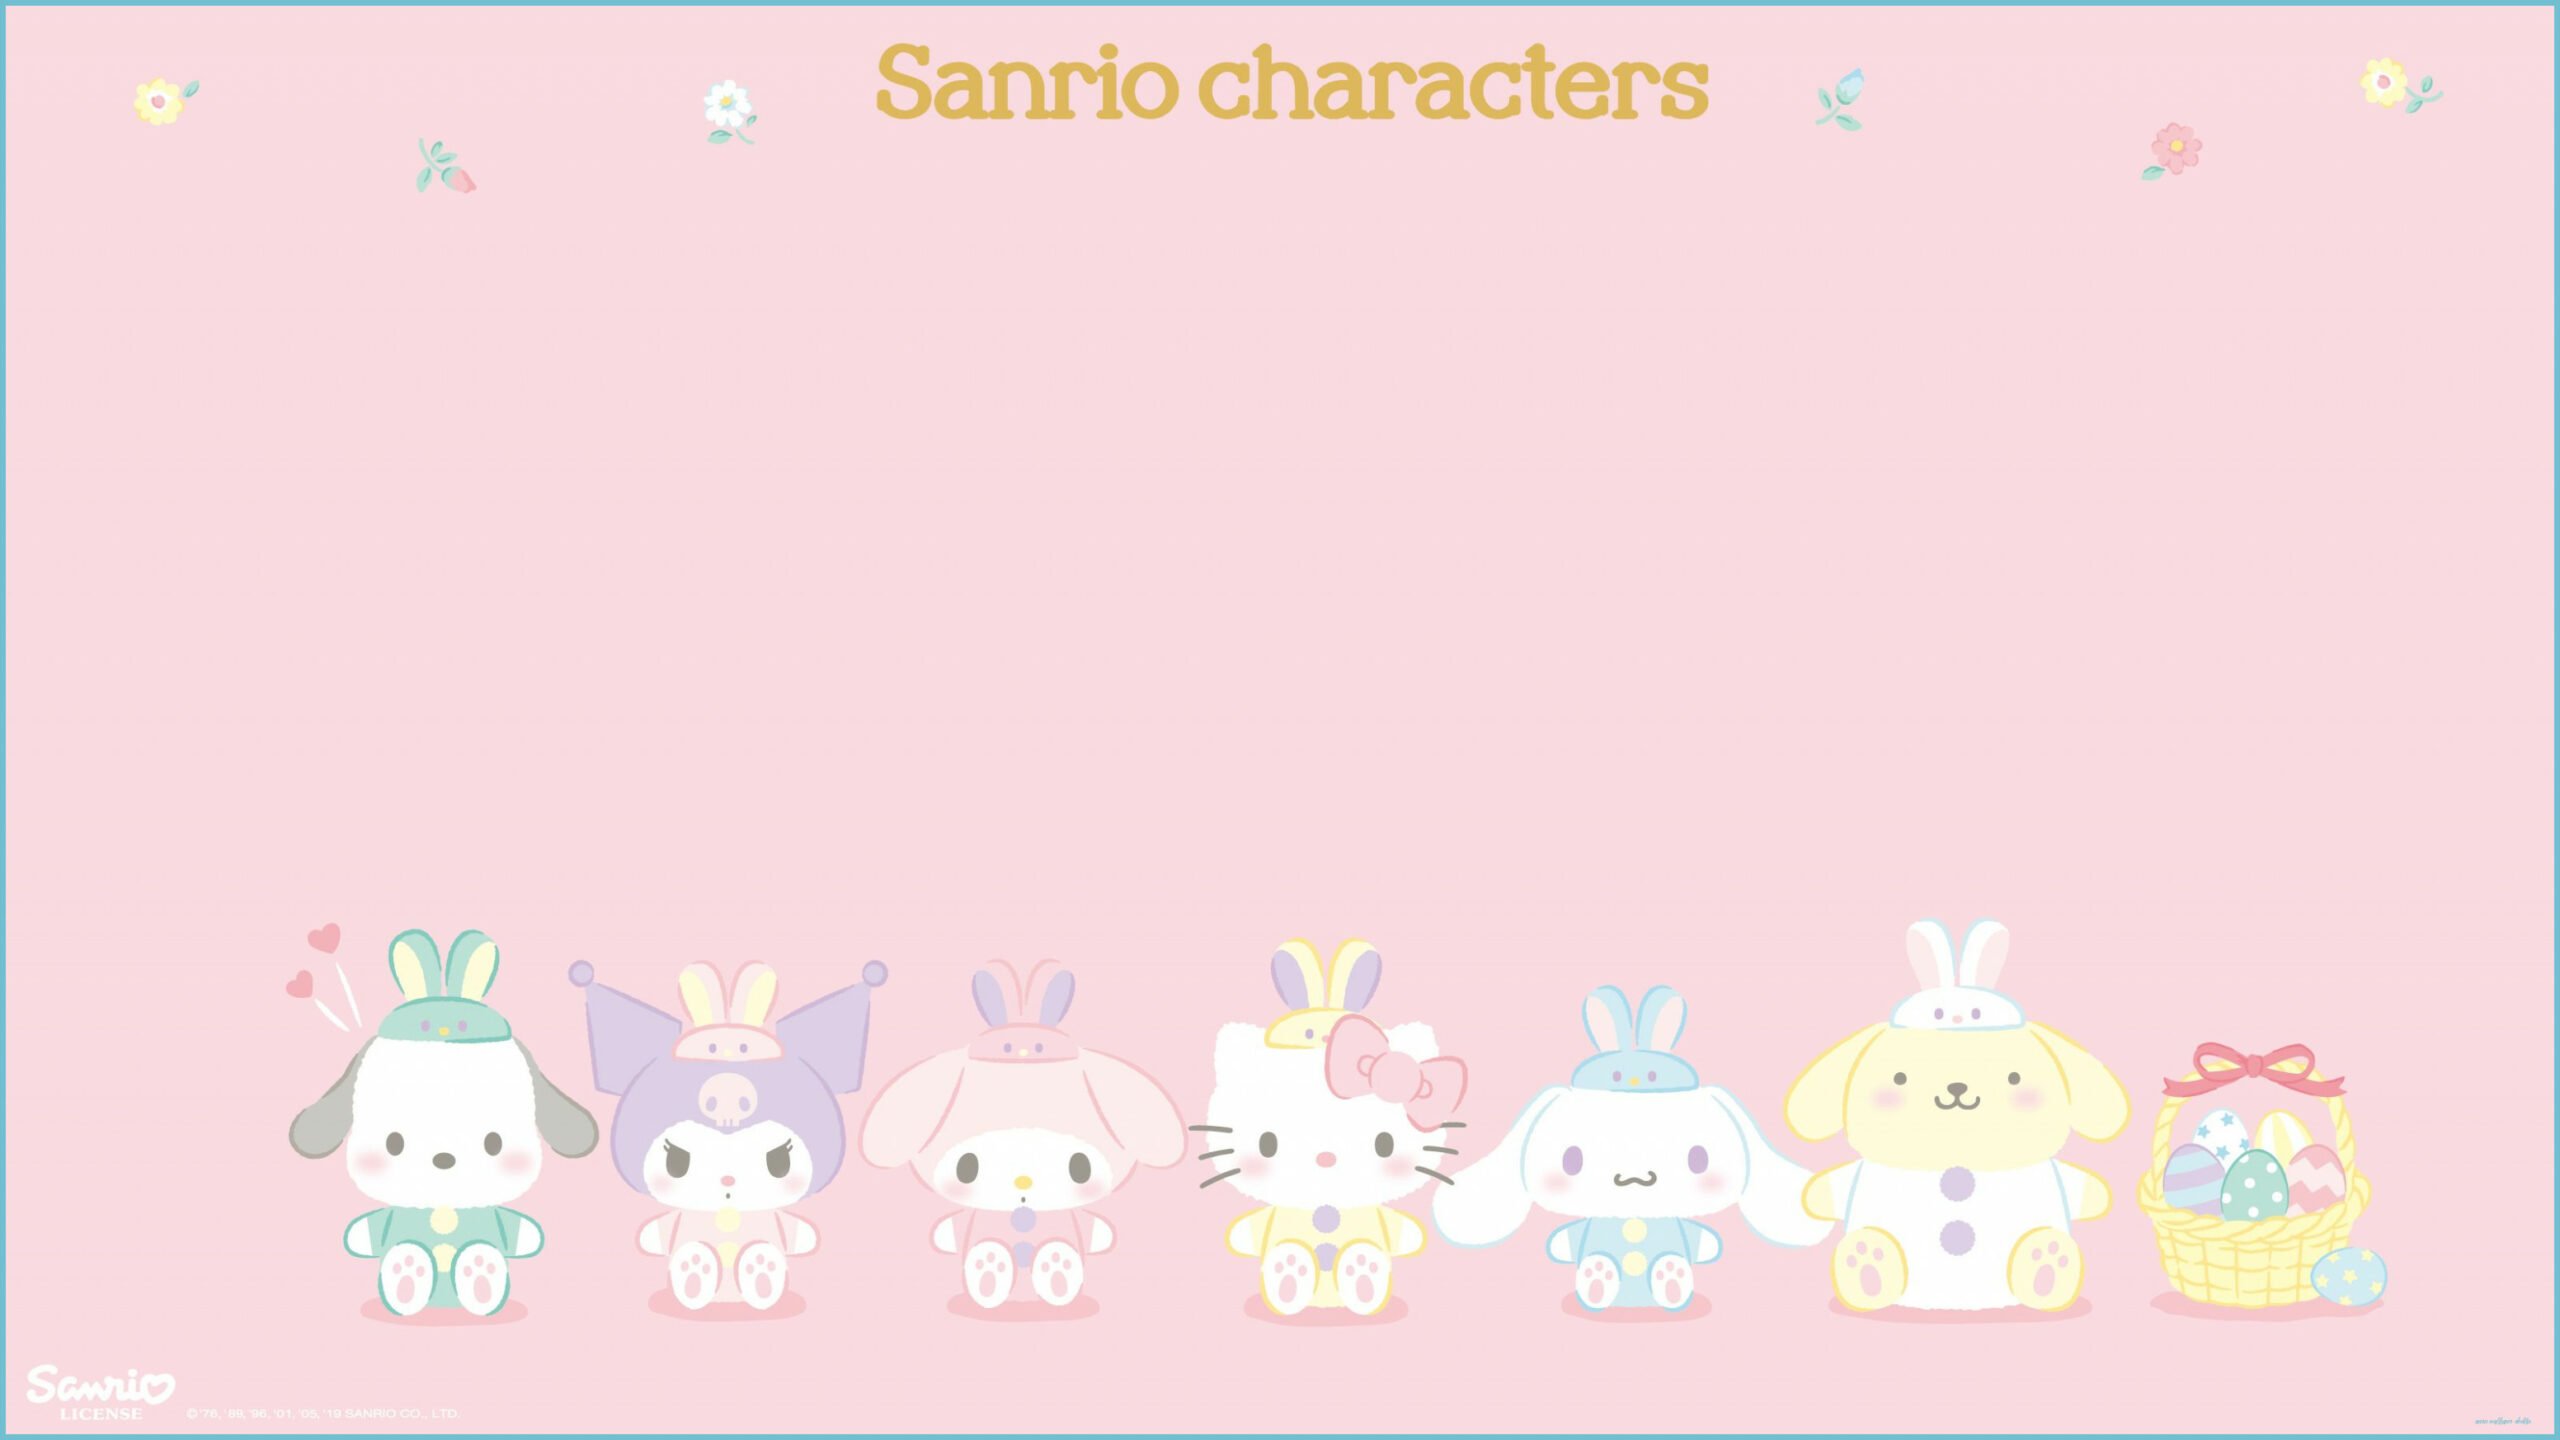  Sanrio Wallpaper Desktop Pink of all time Check it out now 